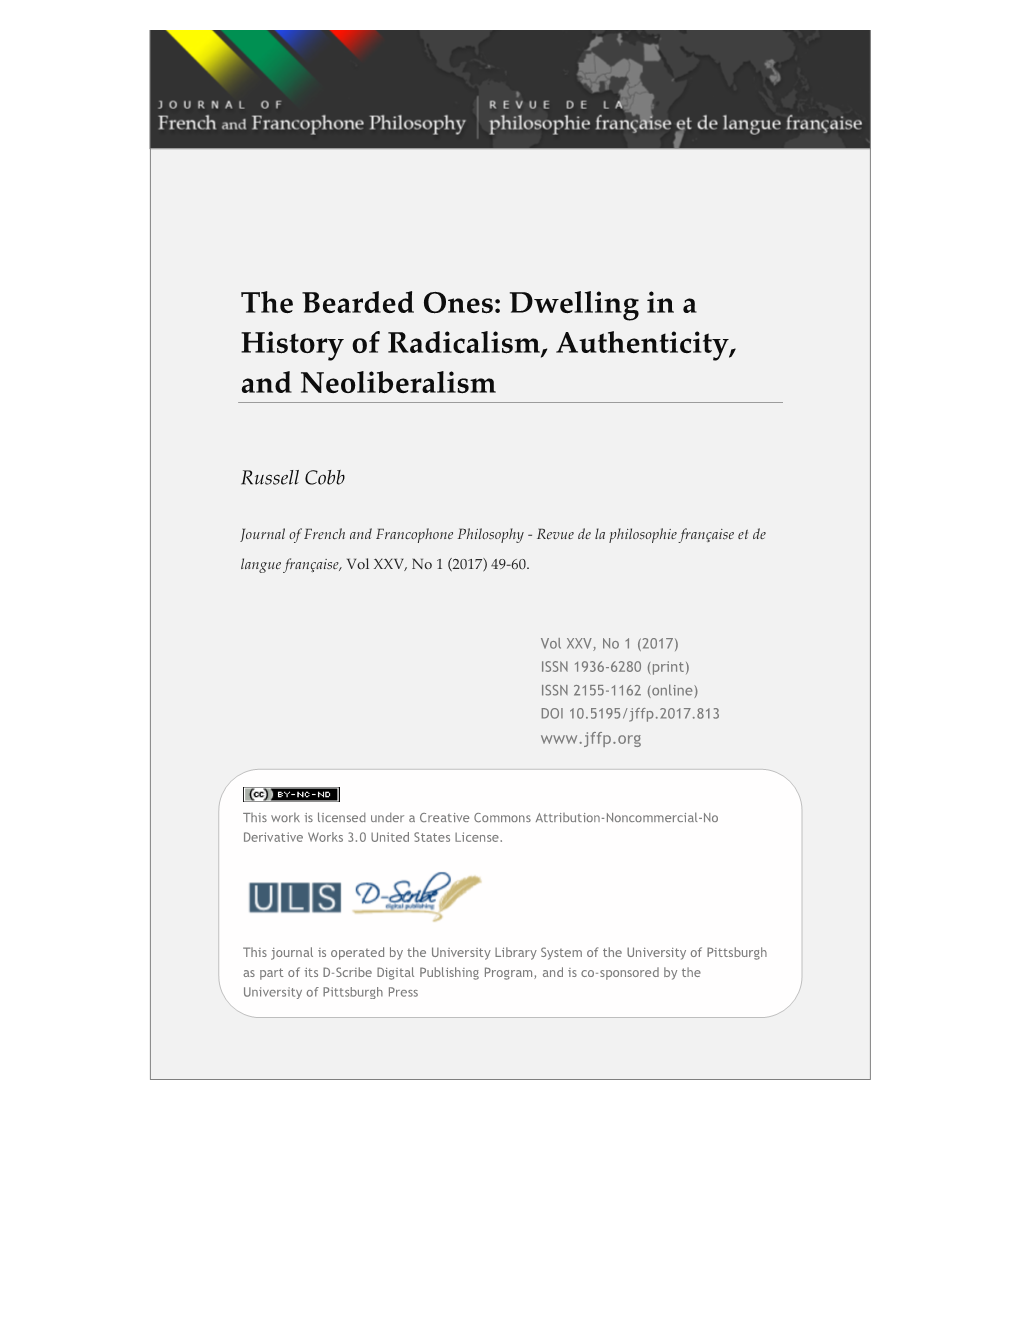 The Bearded Ones: Dwelling in a History of Radicalism, Authenticity, and Neoliberalism